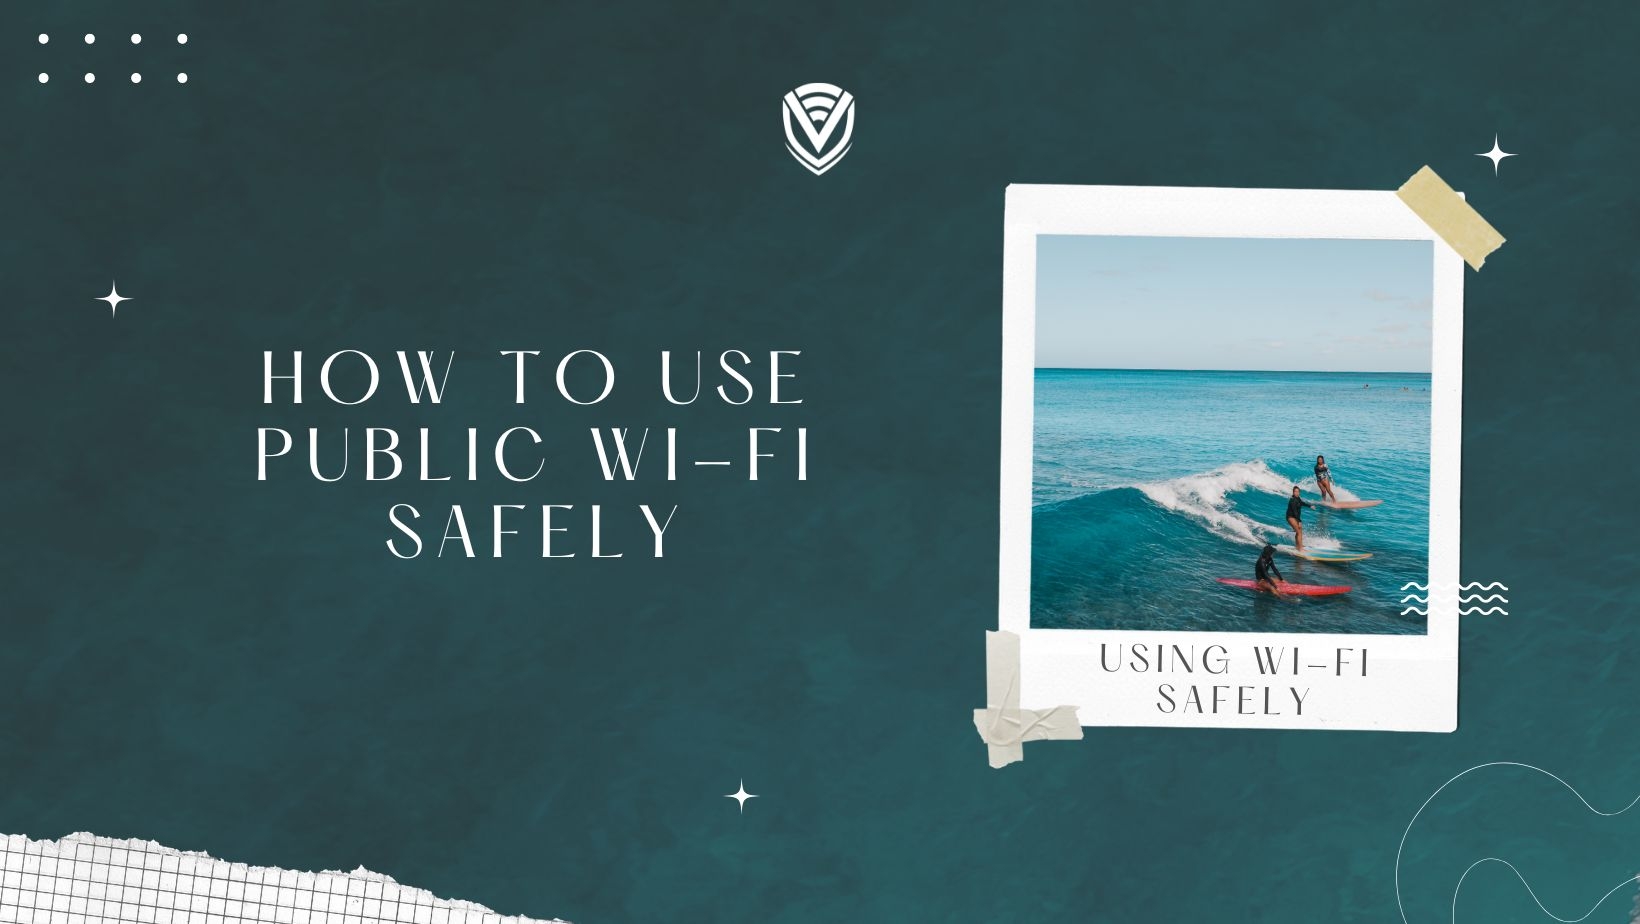 How To Use Public Wi-Fi Safely